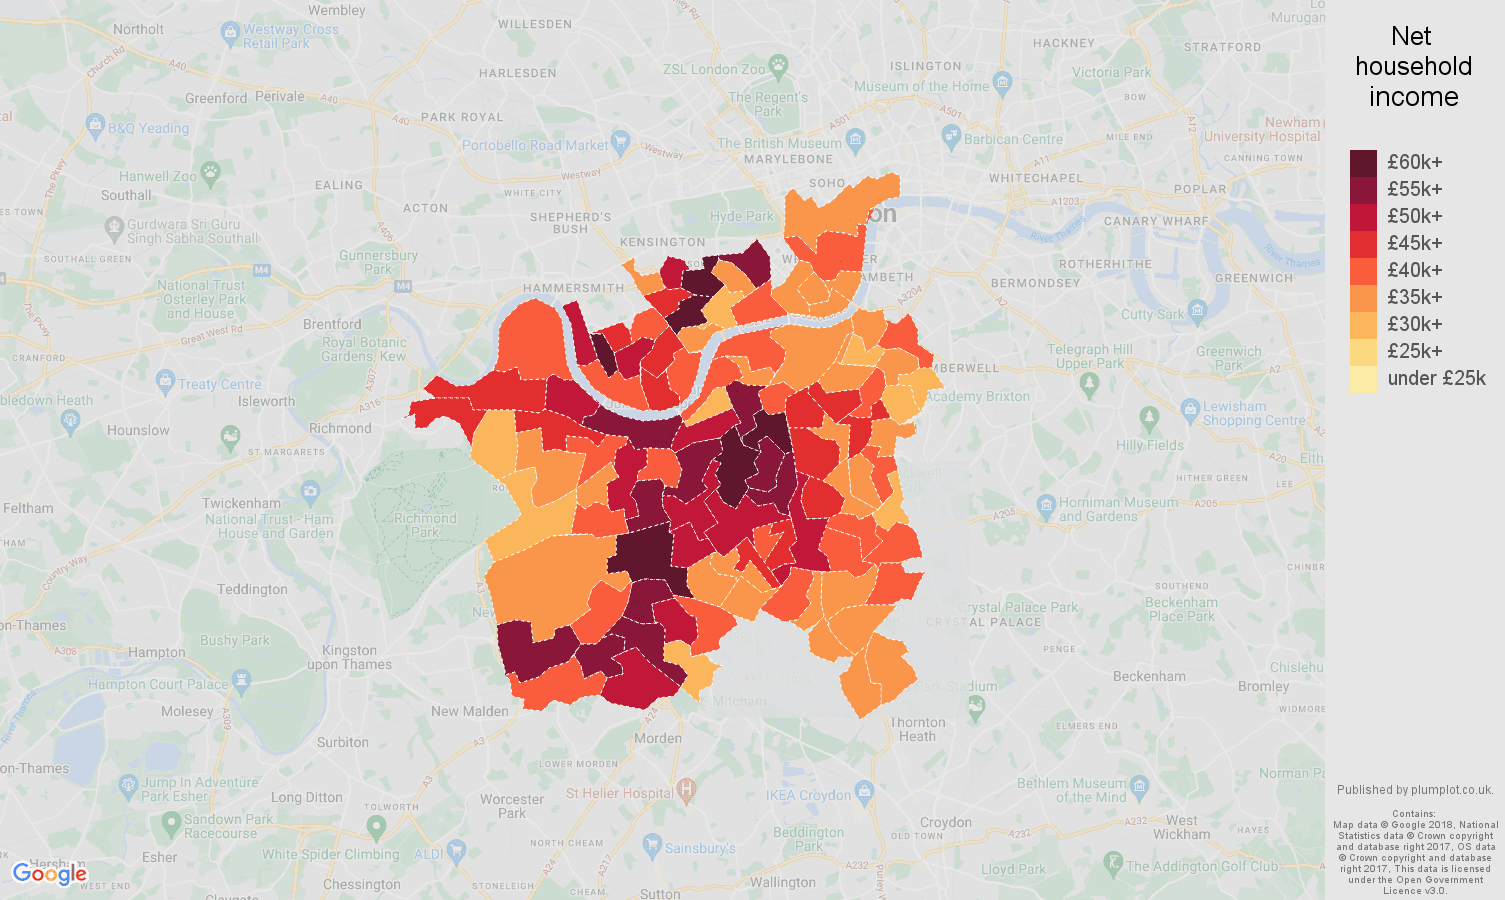 South West London net household income map